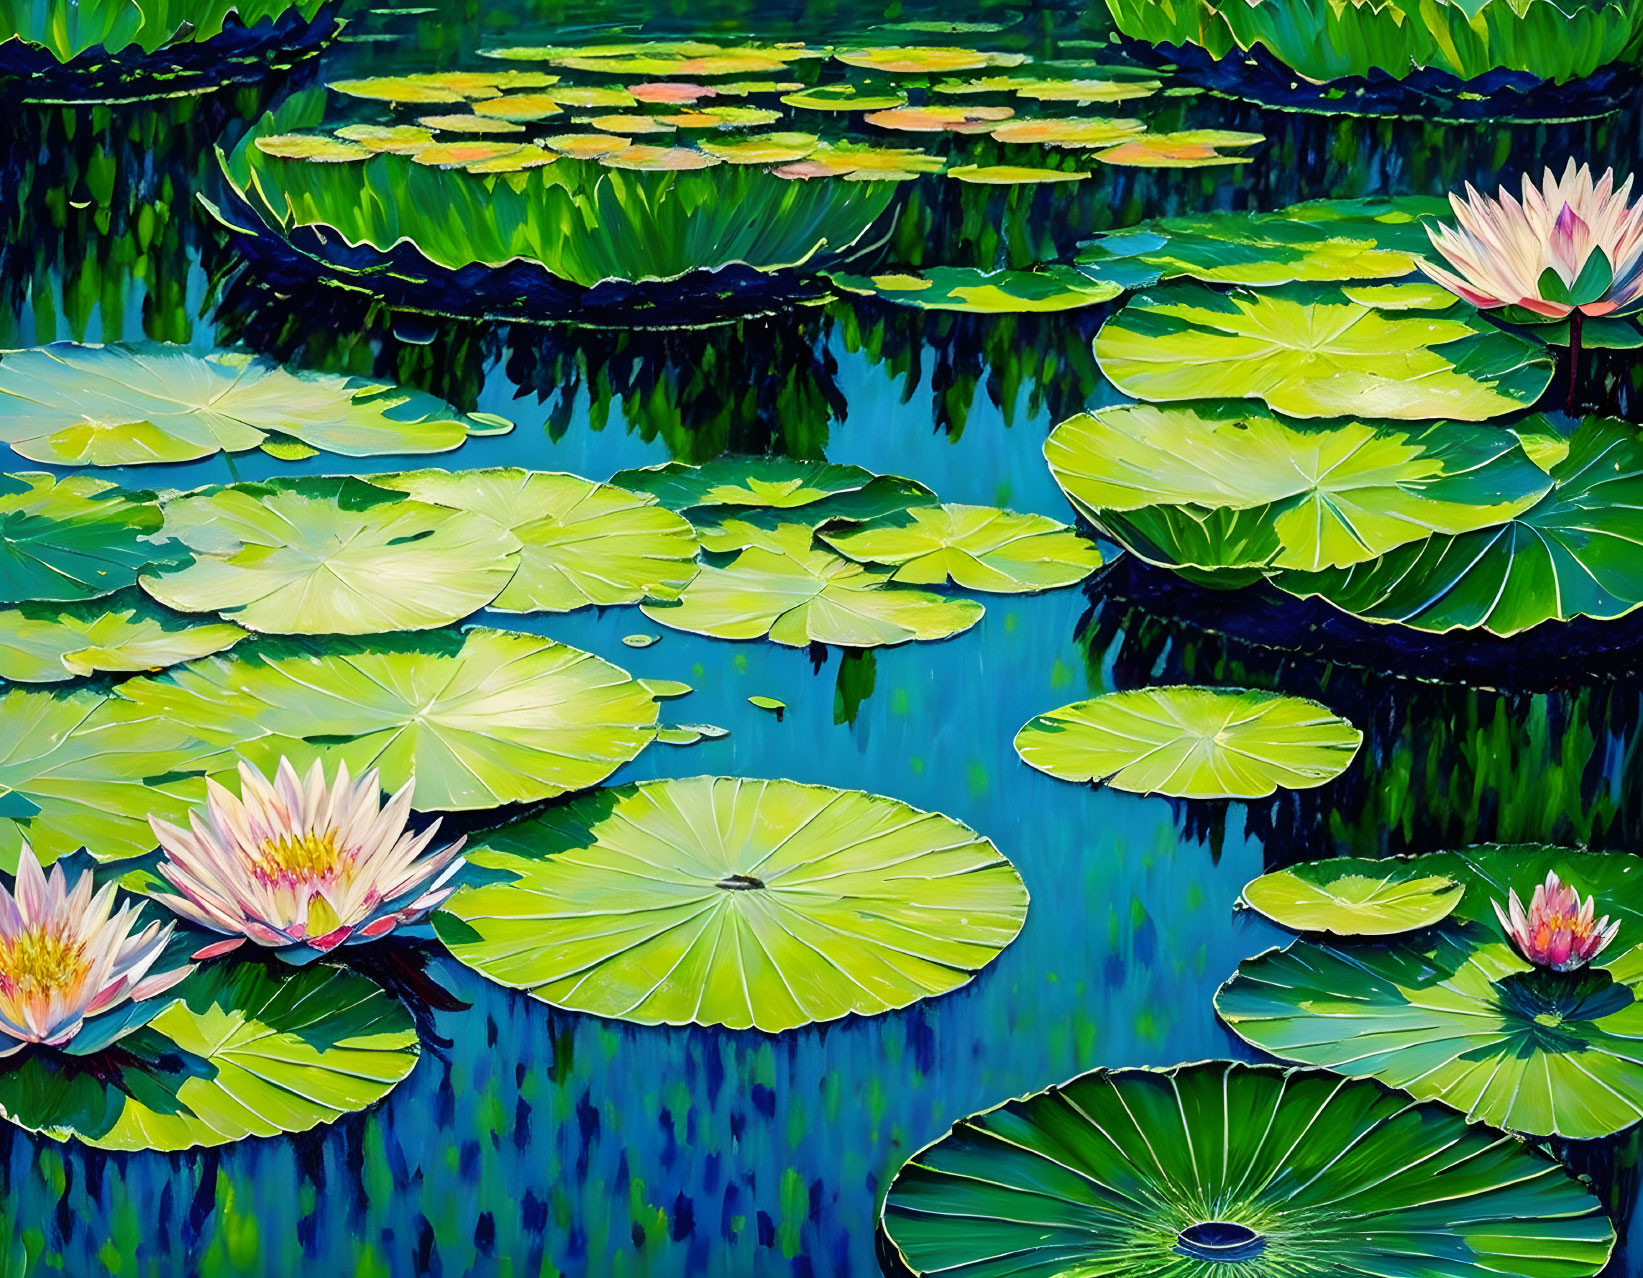 Colorful water lilies and green pads in serene pond landscape